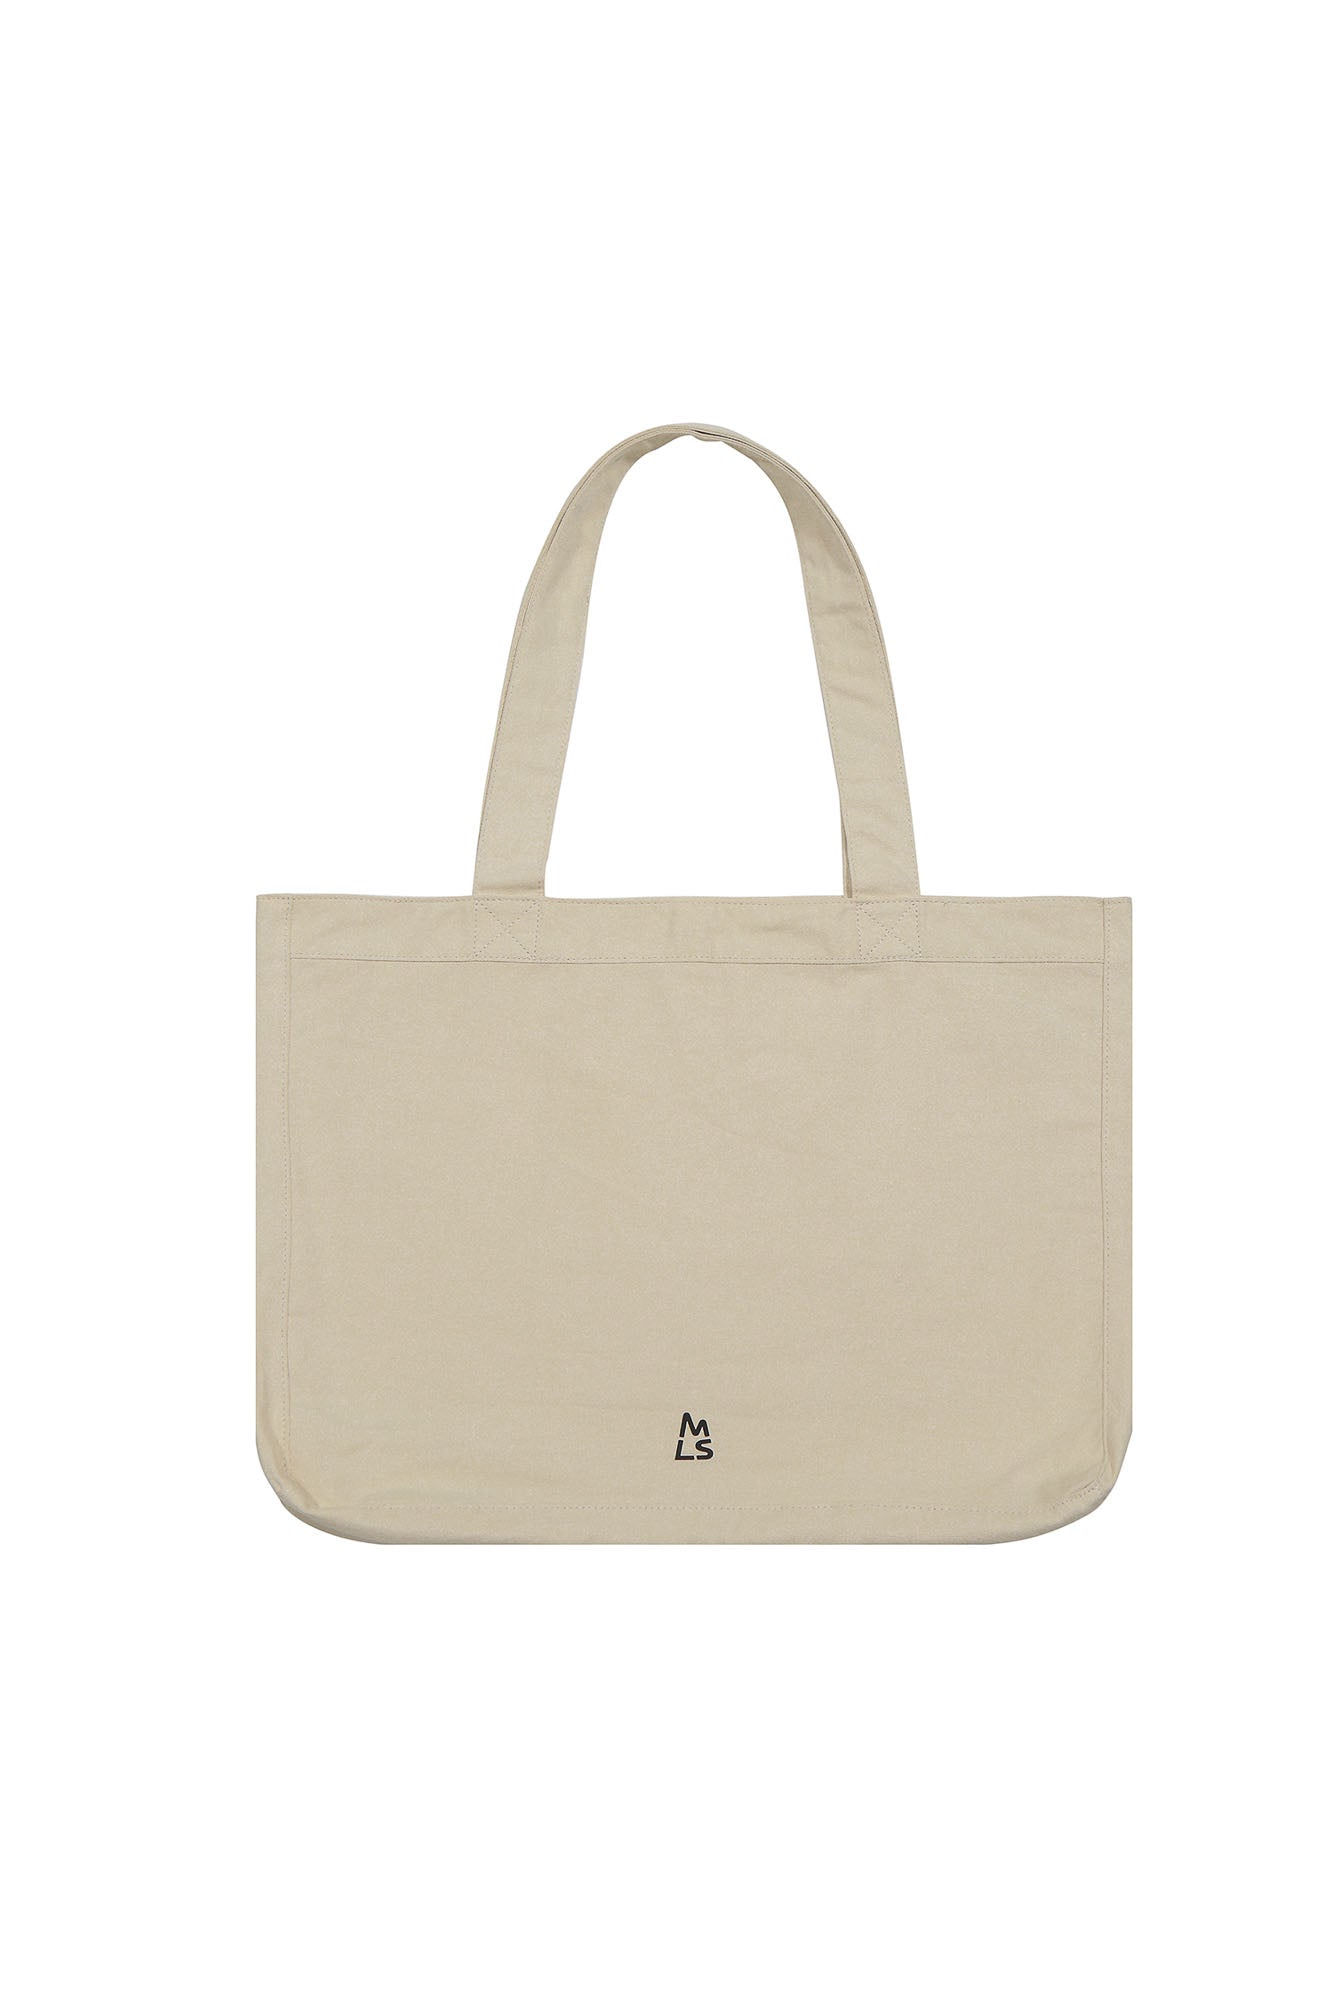 The Magnlens Tote